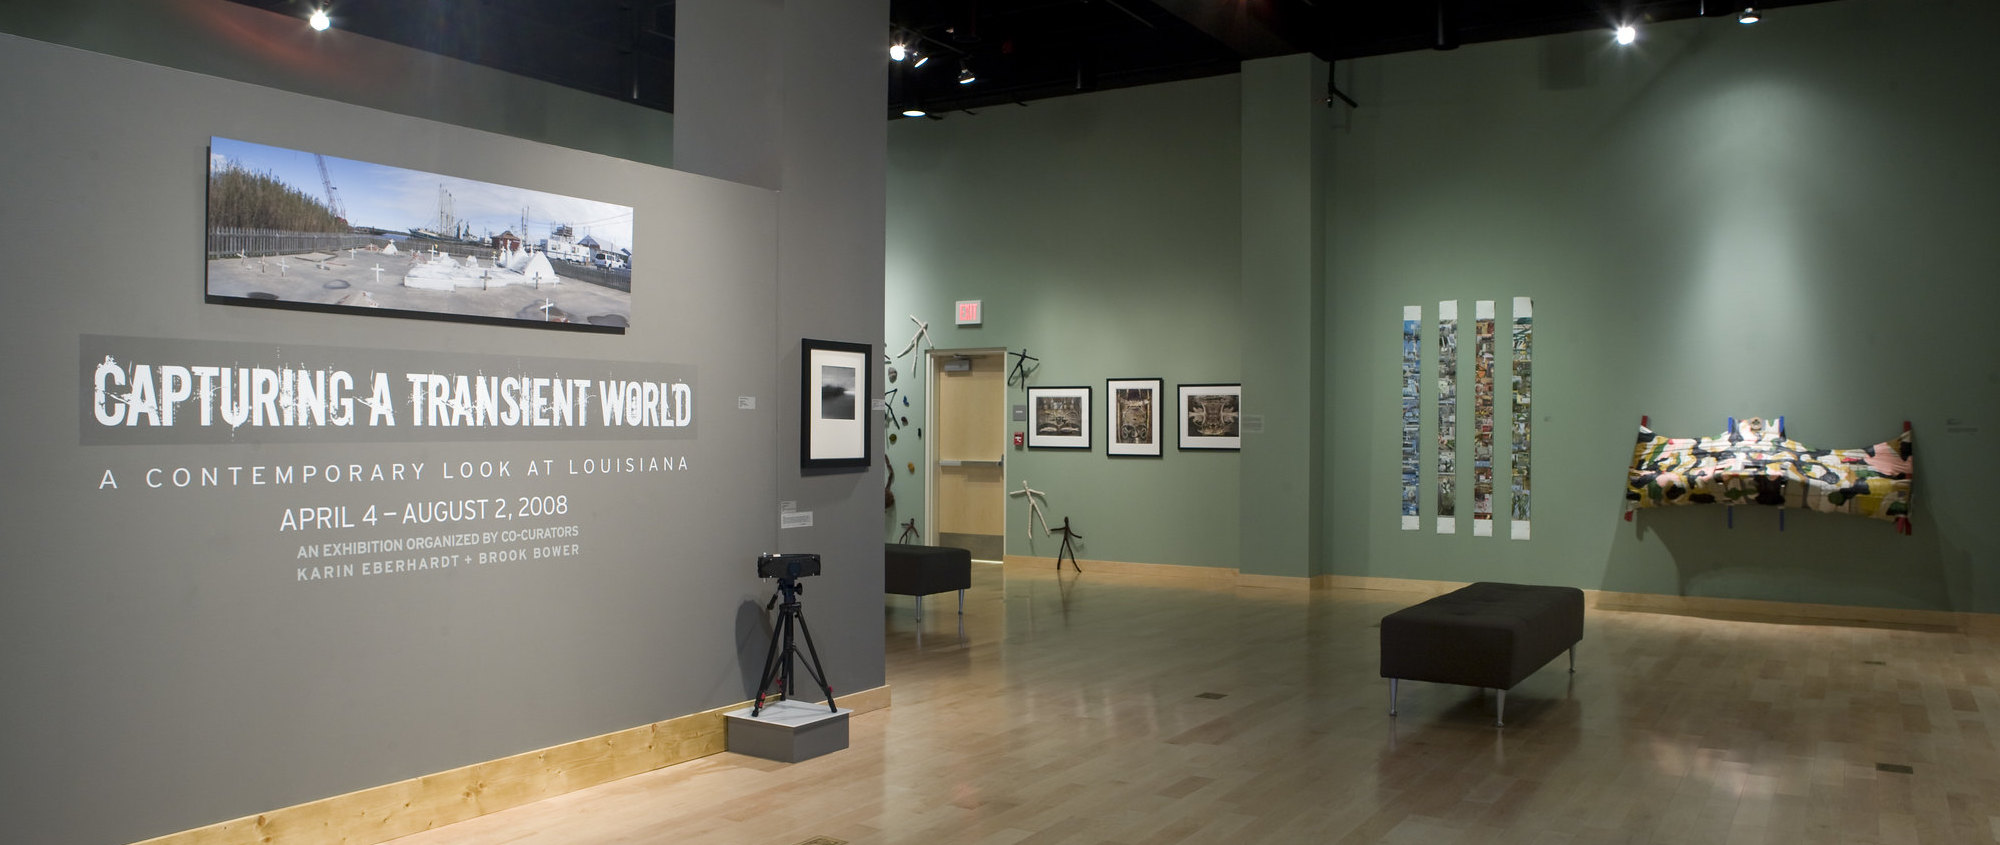 Capturing a Transient World: A Contemporary Look at Louisiana